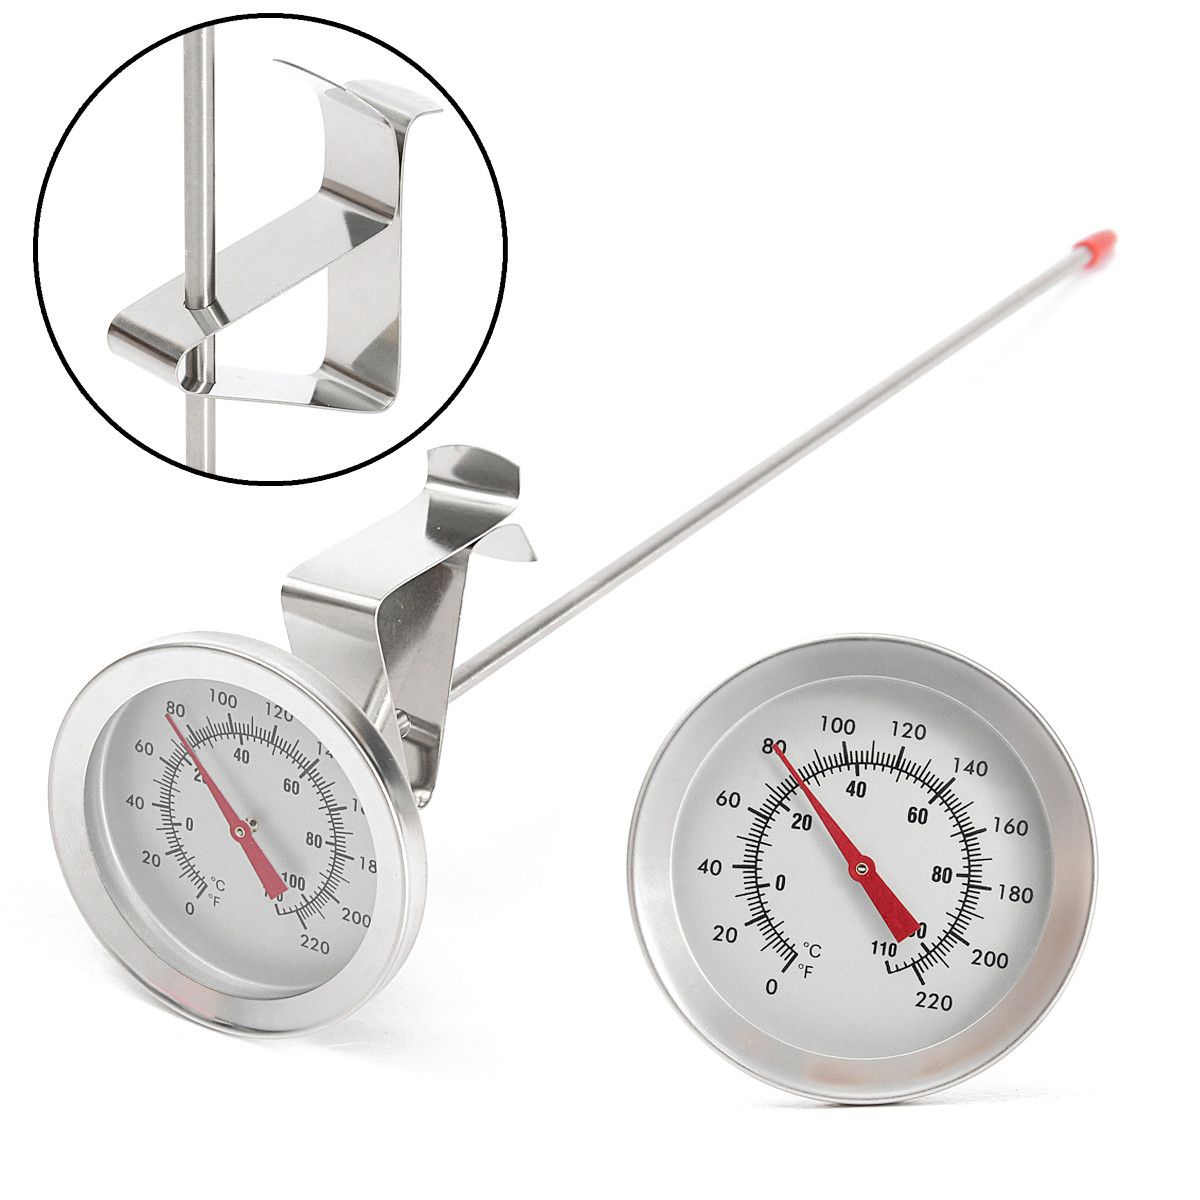 12-Inch-Stainless-Steel-Homebrew-Thermometer-Probe-Beer-Food-Temperature-Measuring-Wine-Thermometer-1365841